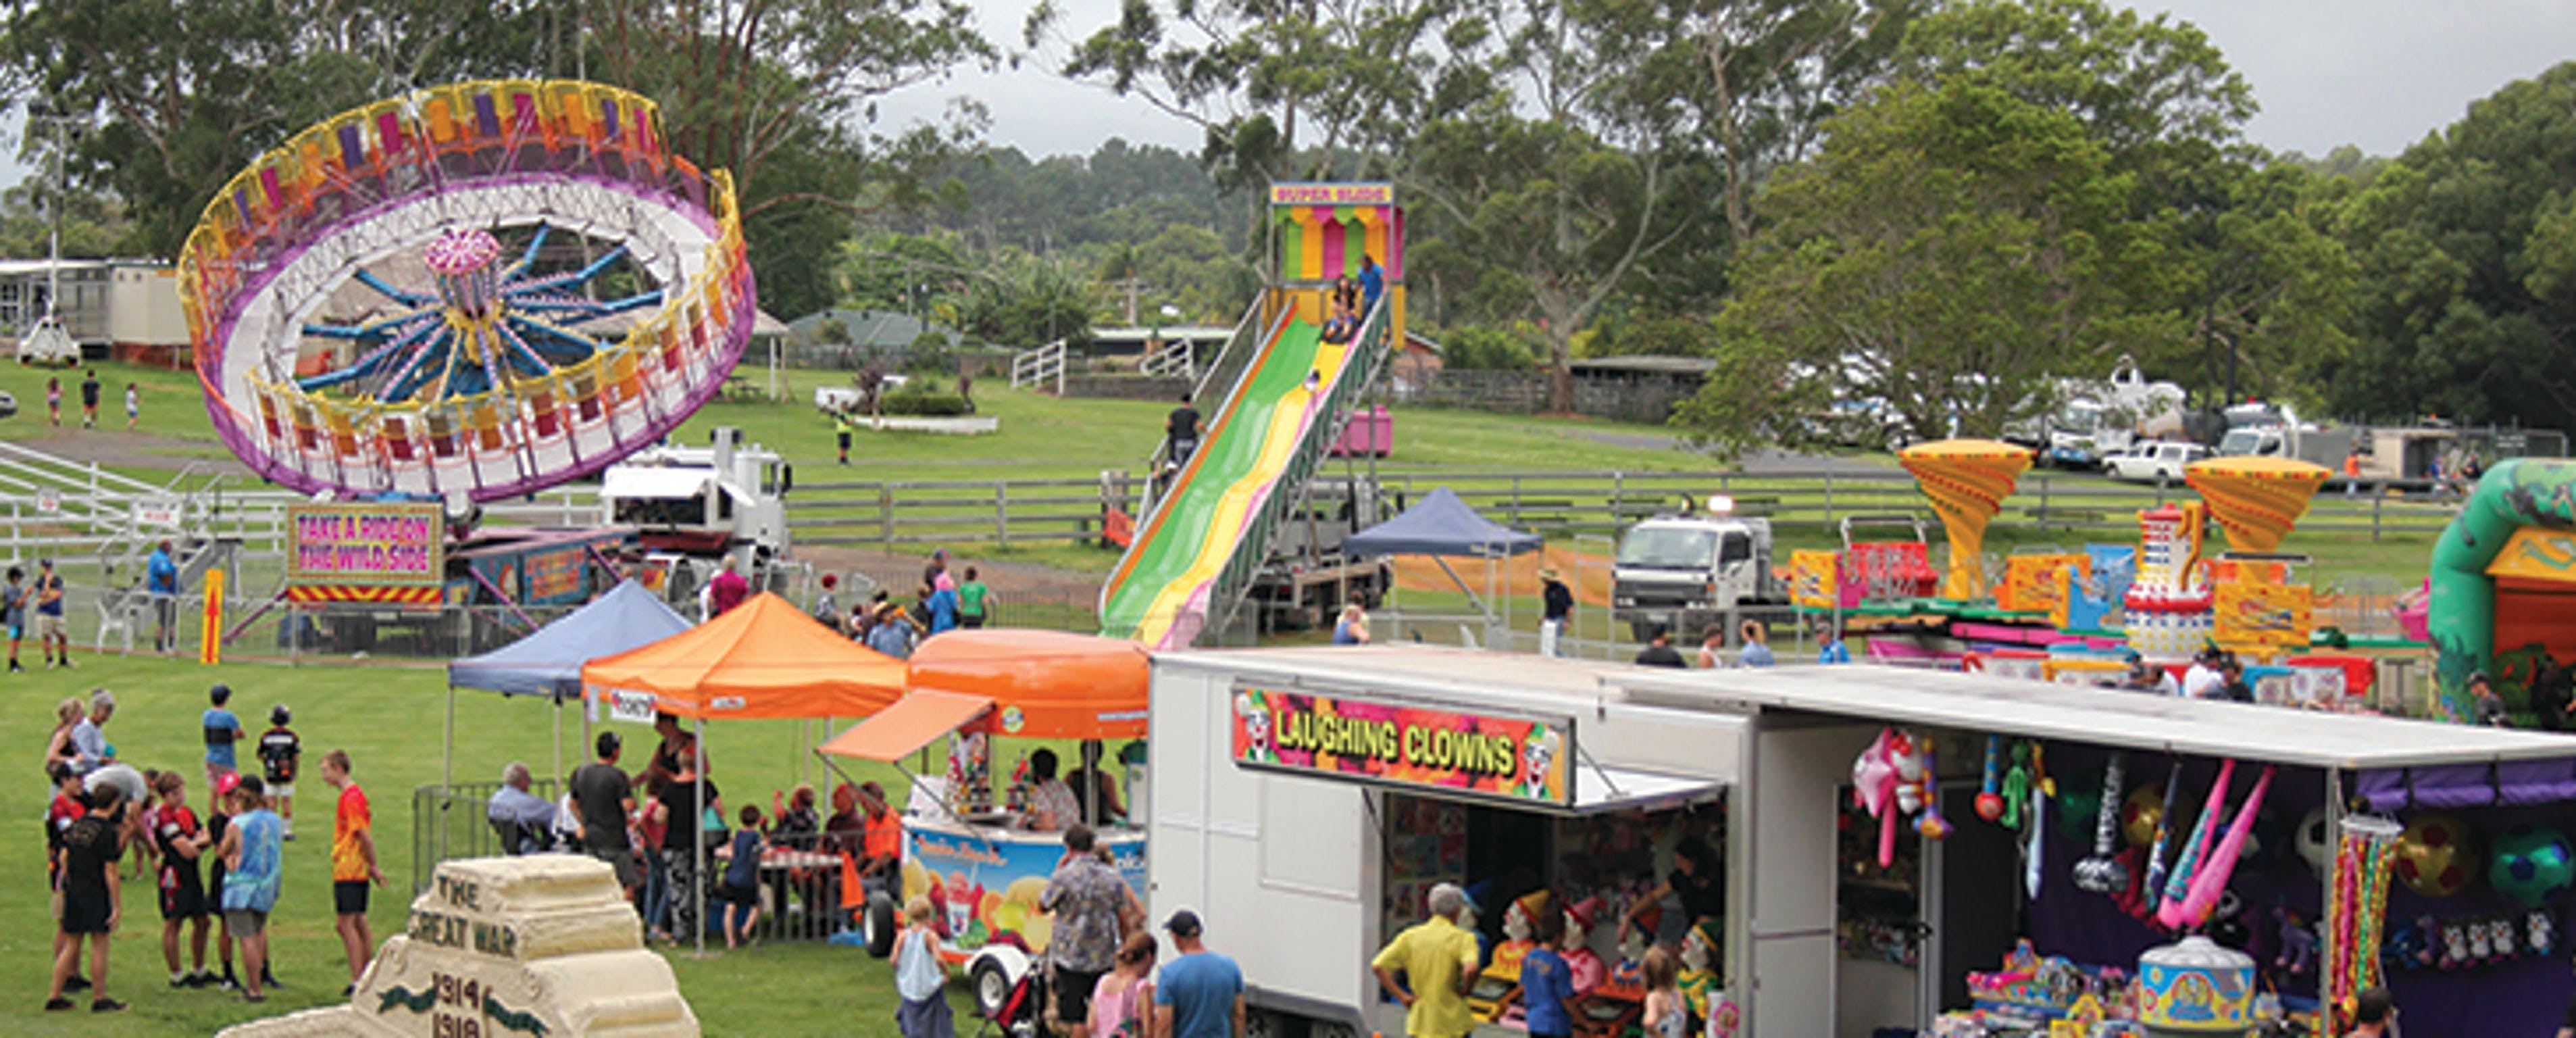 Alstonville Agricultural Society Show - Kingaroy Accommodation